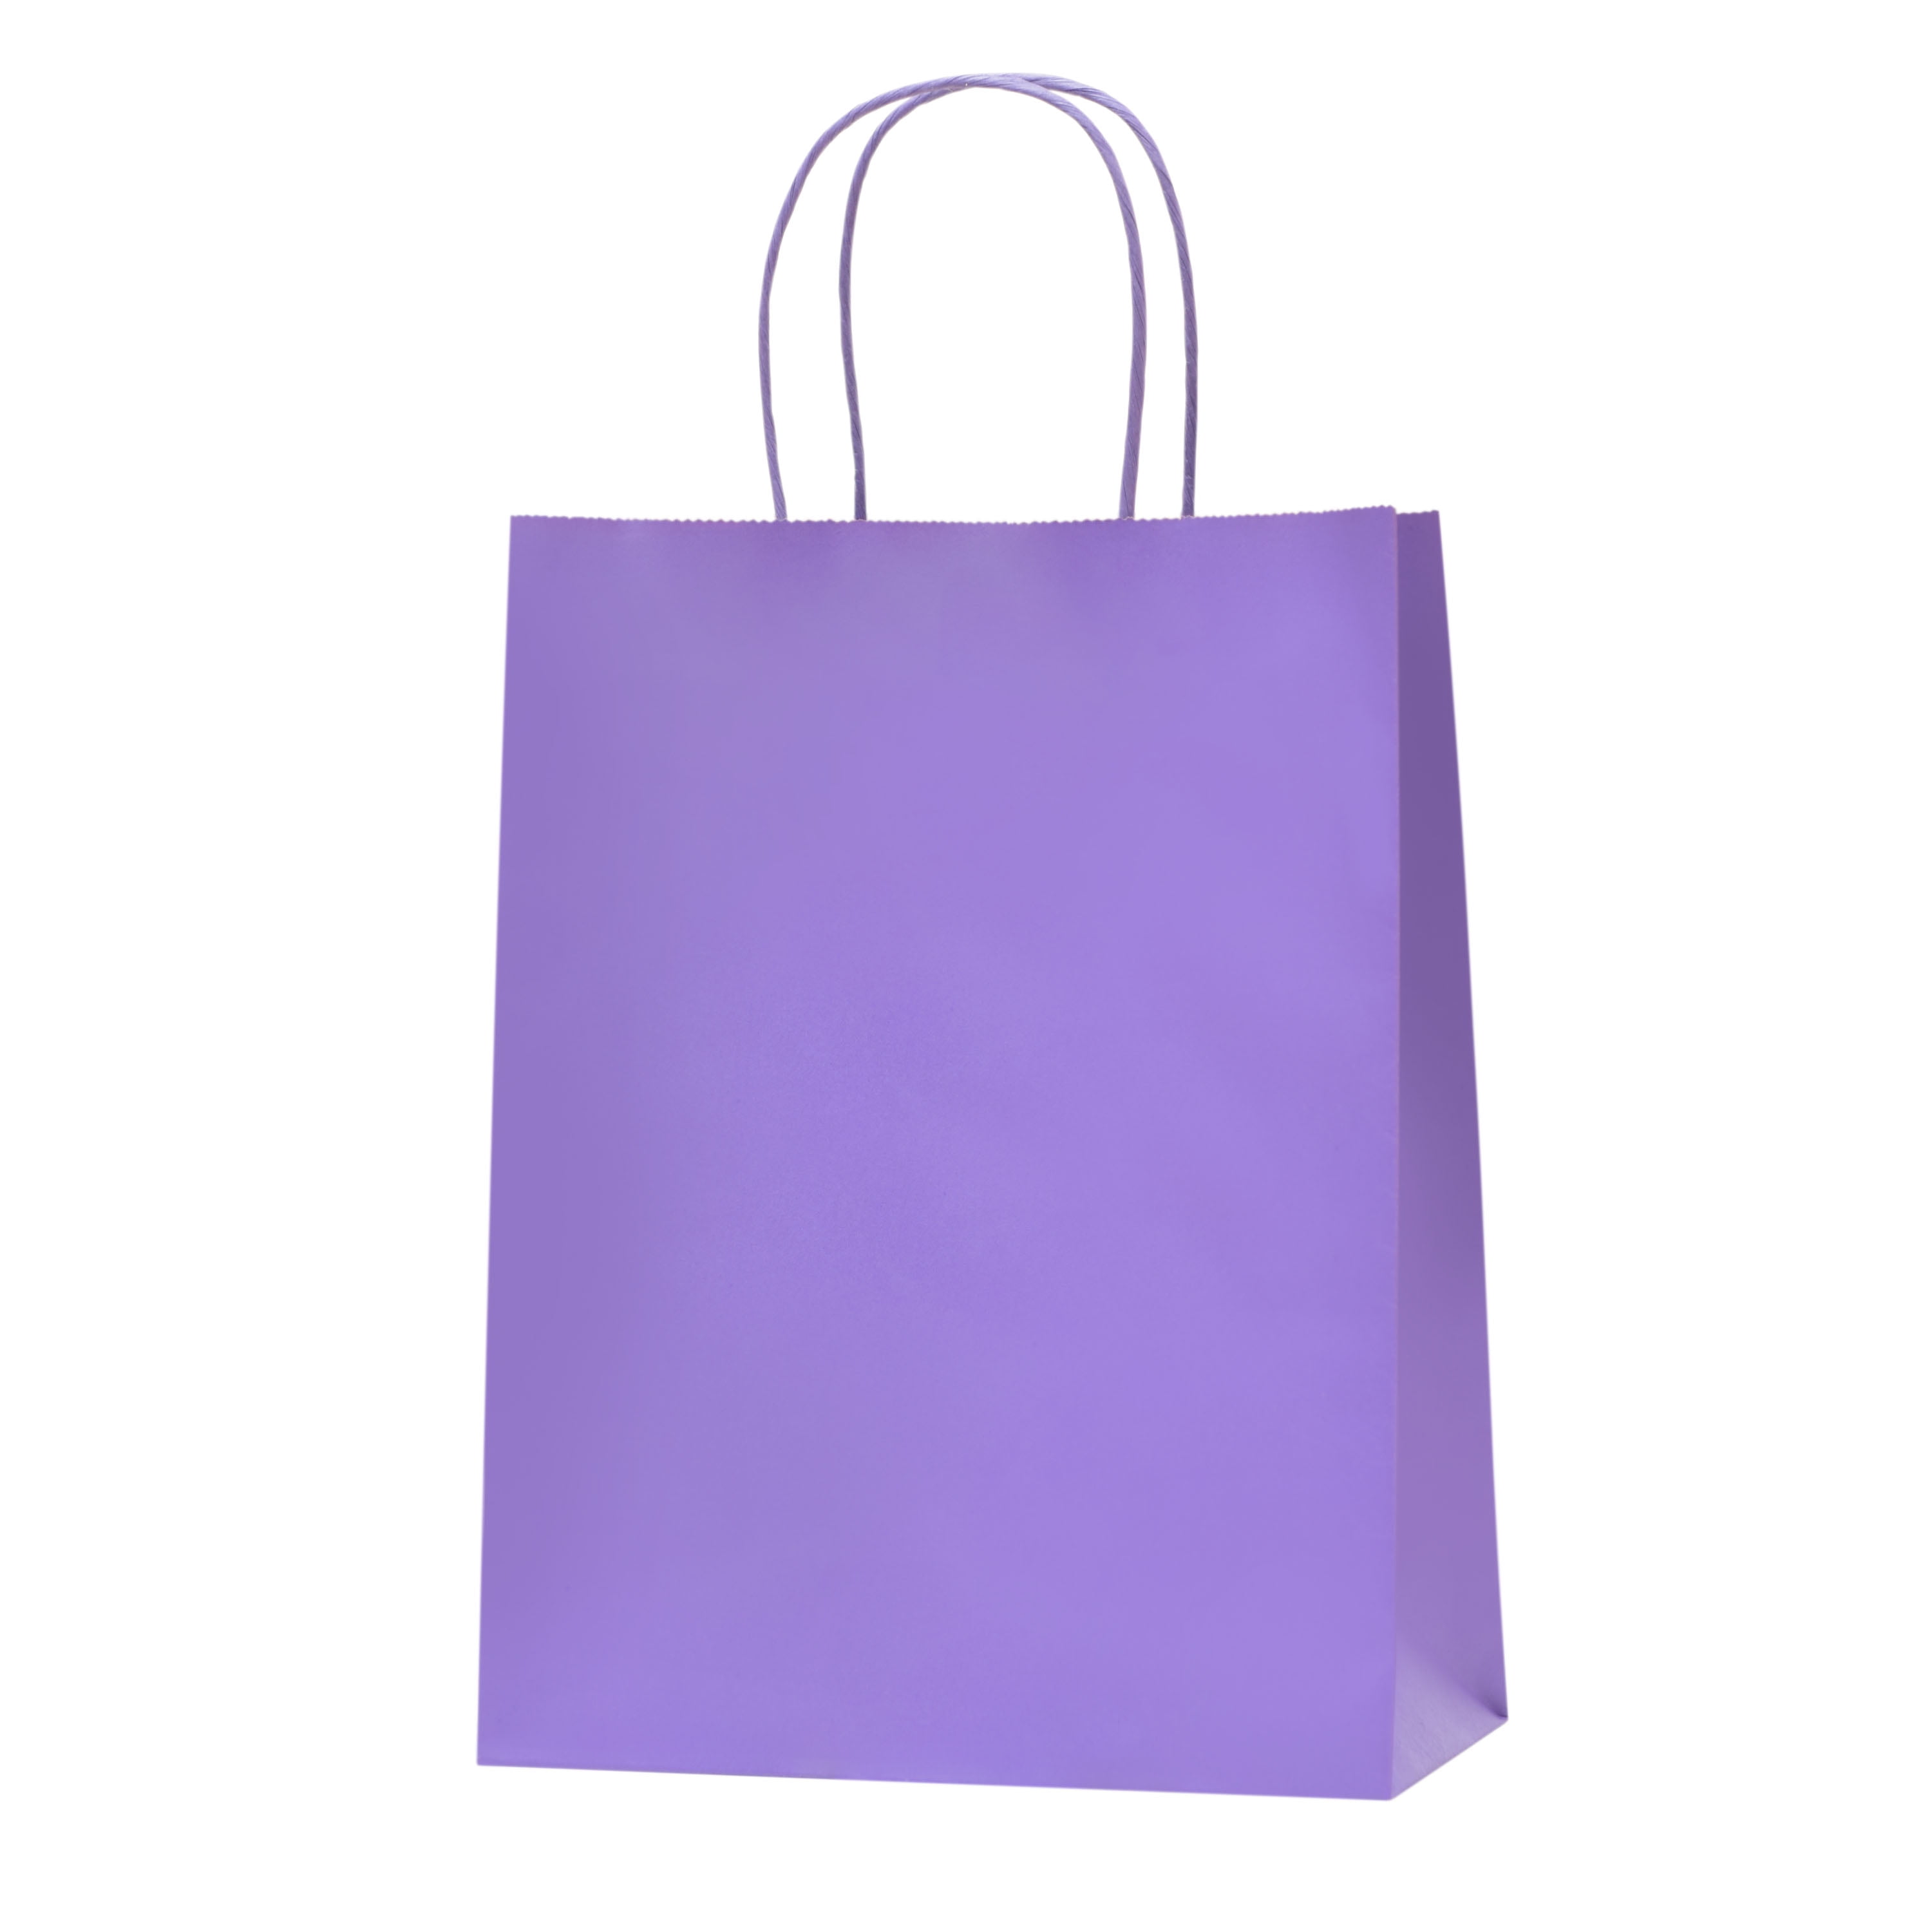 TIMBLESSING 24 purple Bulk Kraft Party Gift Bags With 24 Sheets of purple  Wrapping Paper, Small Size Gift Bag, (8.6x3.2x5.9 Inch)